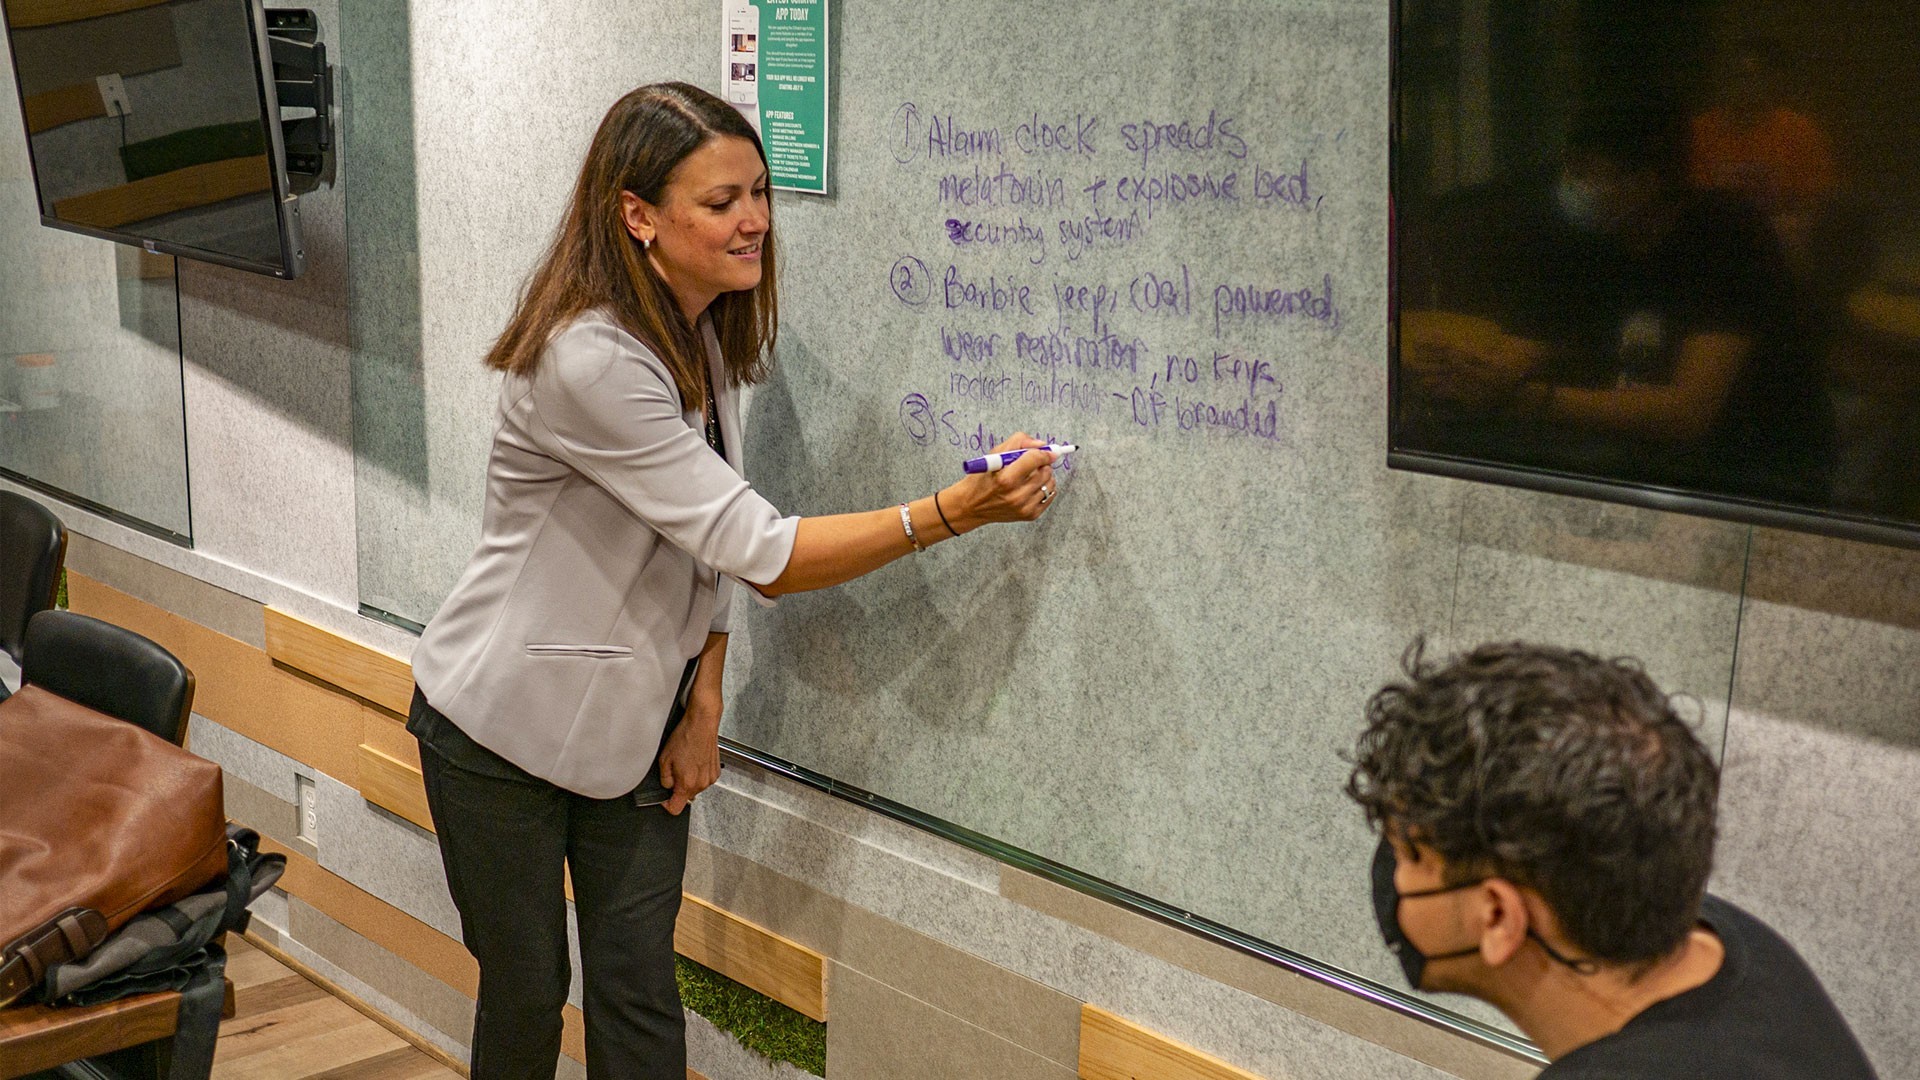 Presenter writing on a dry erase wall